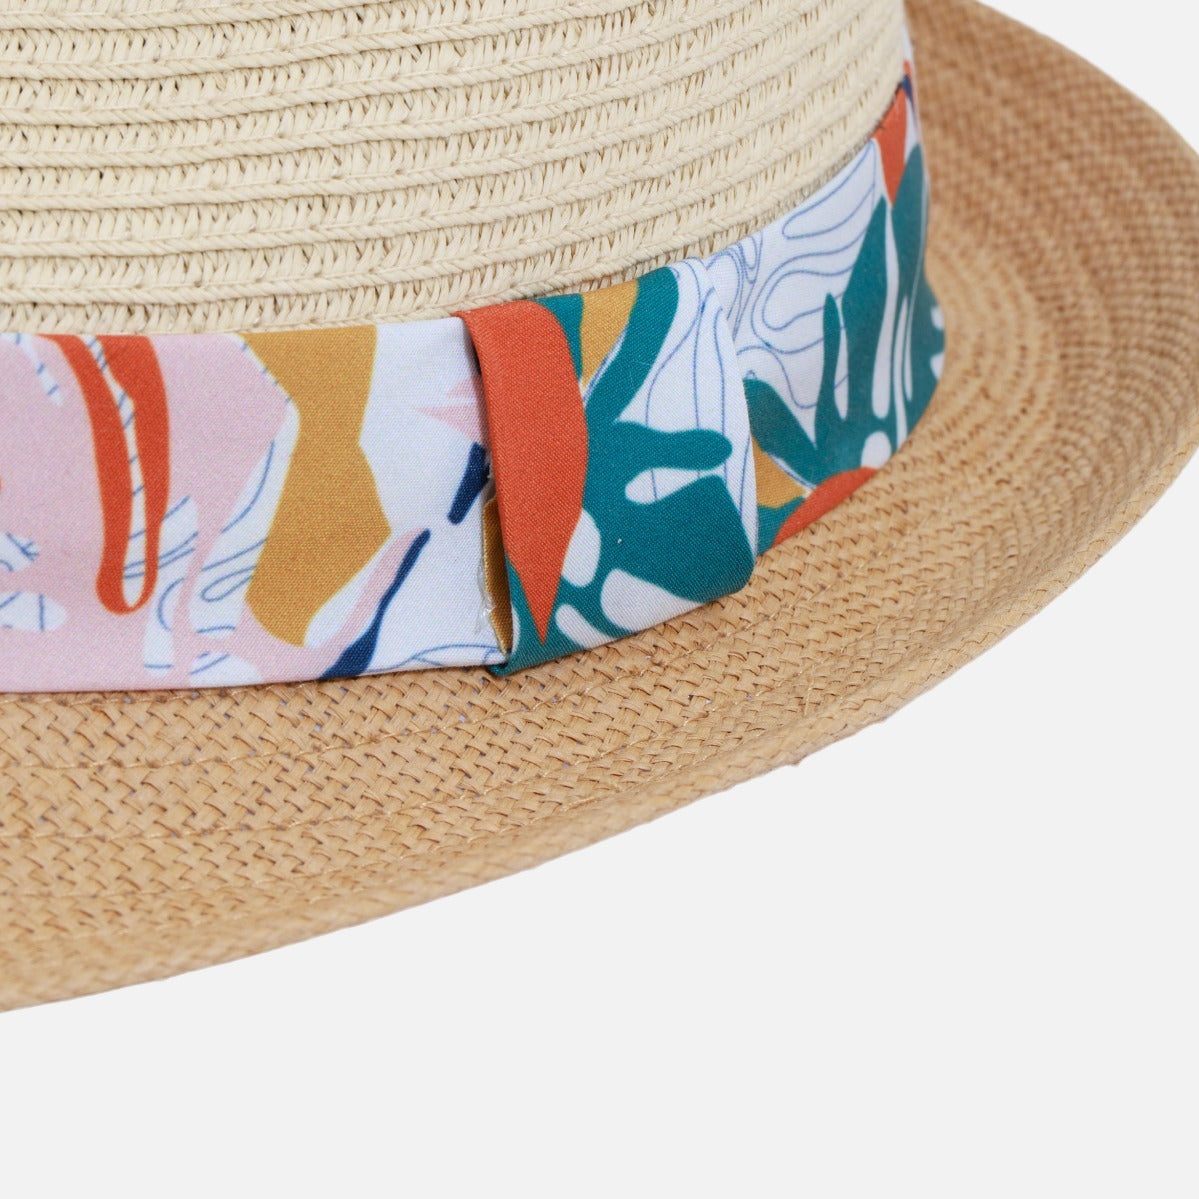 Fedora two-tone straw hat with ribbon and colored tropical flowers print